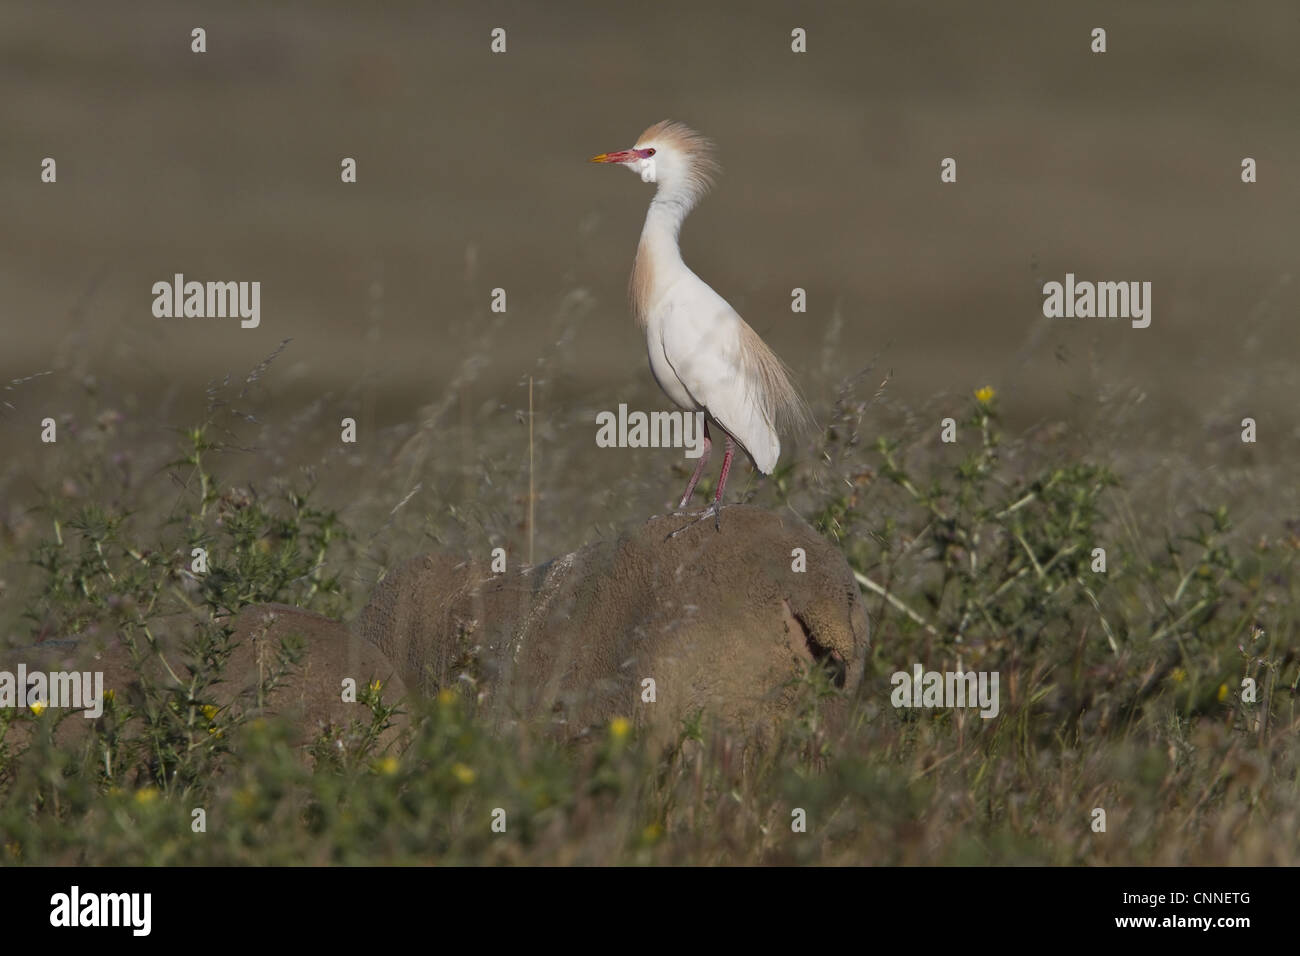 Cattle Egret in courtship colours/ plumage standing on a sheep. Stock Photo